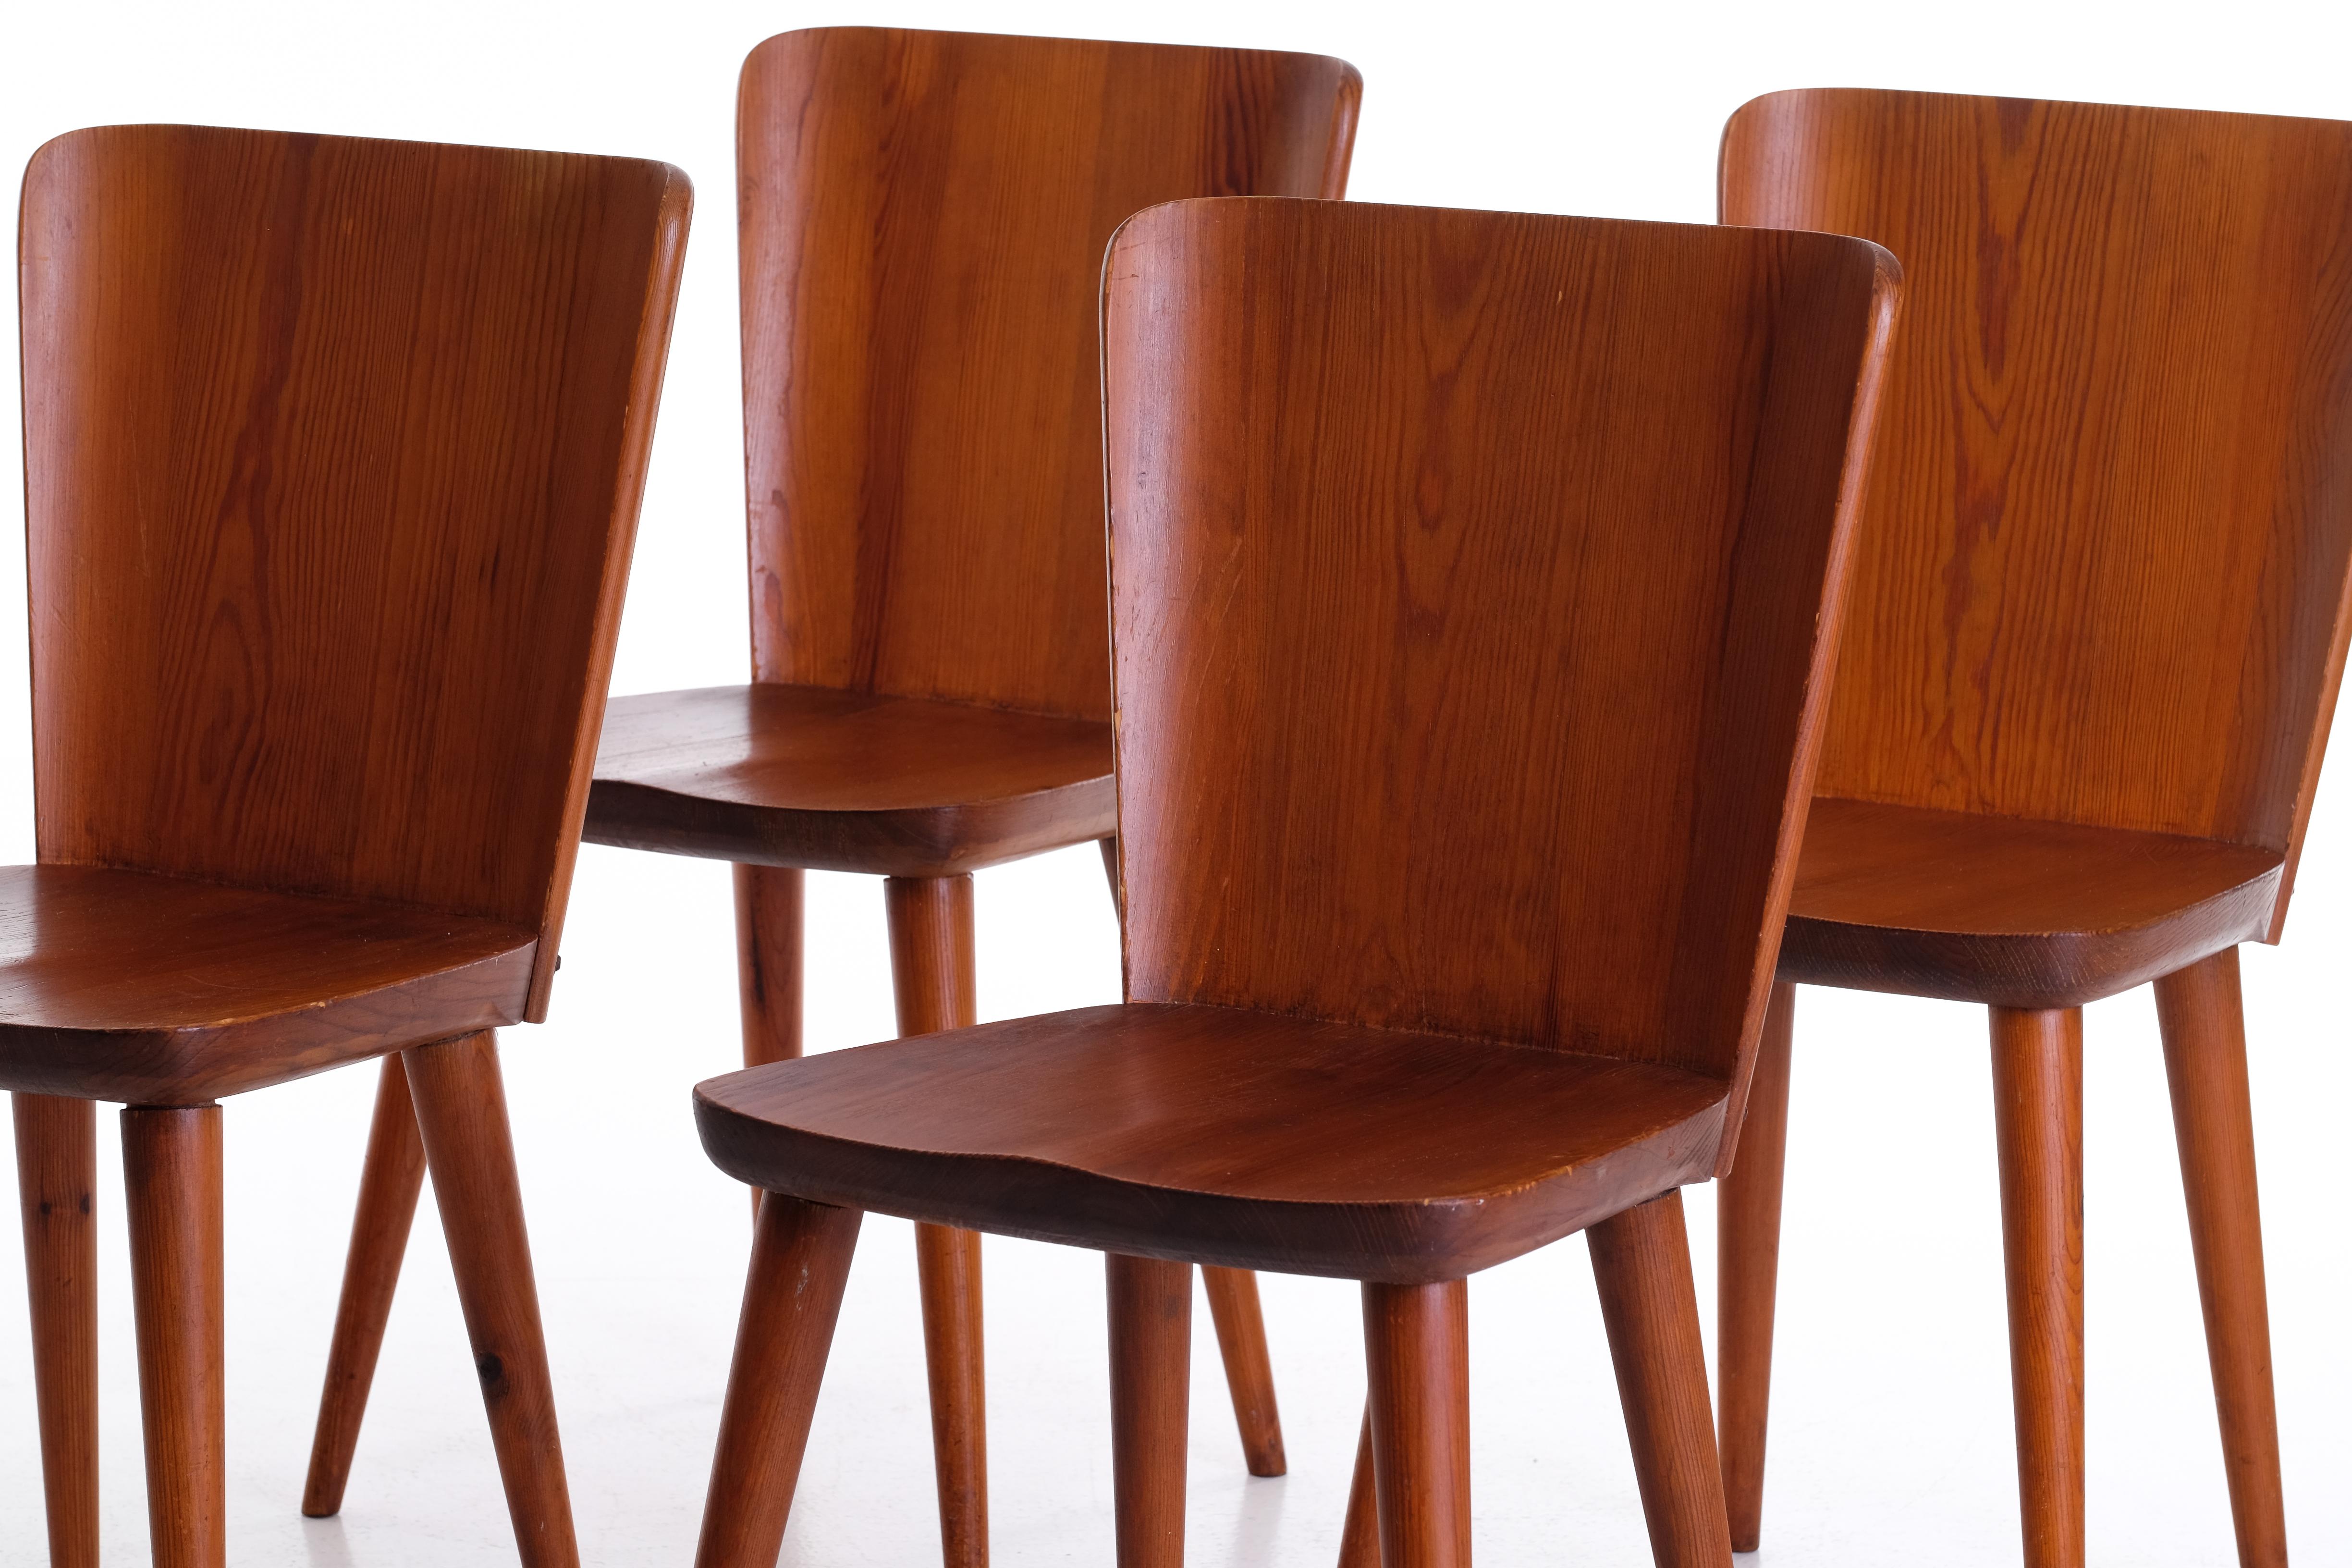 Mid-20th Century Set of 4 Swedish Pine Chairs by Göran Malmvall, Svensk Fur, 1960s For Sale